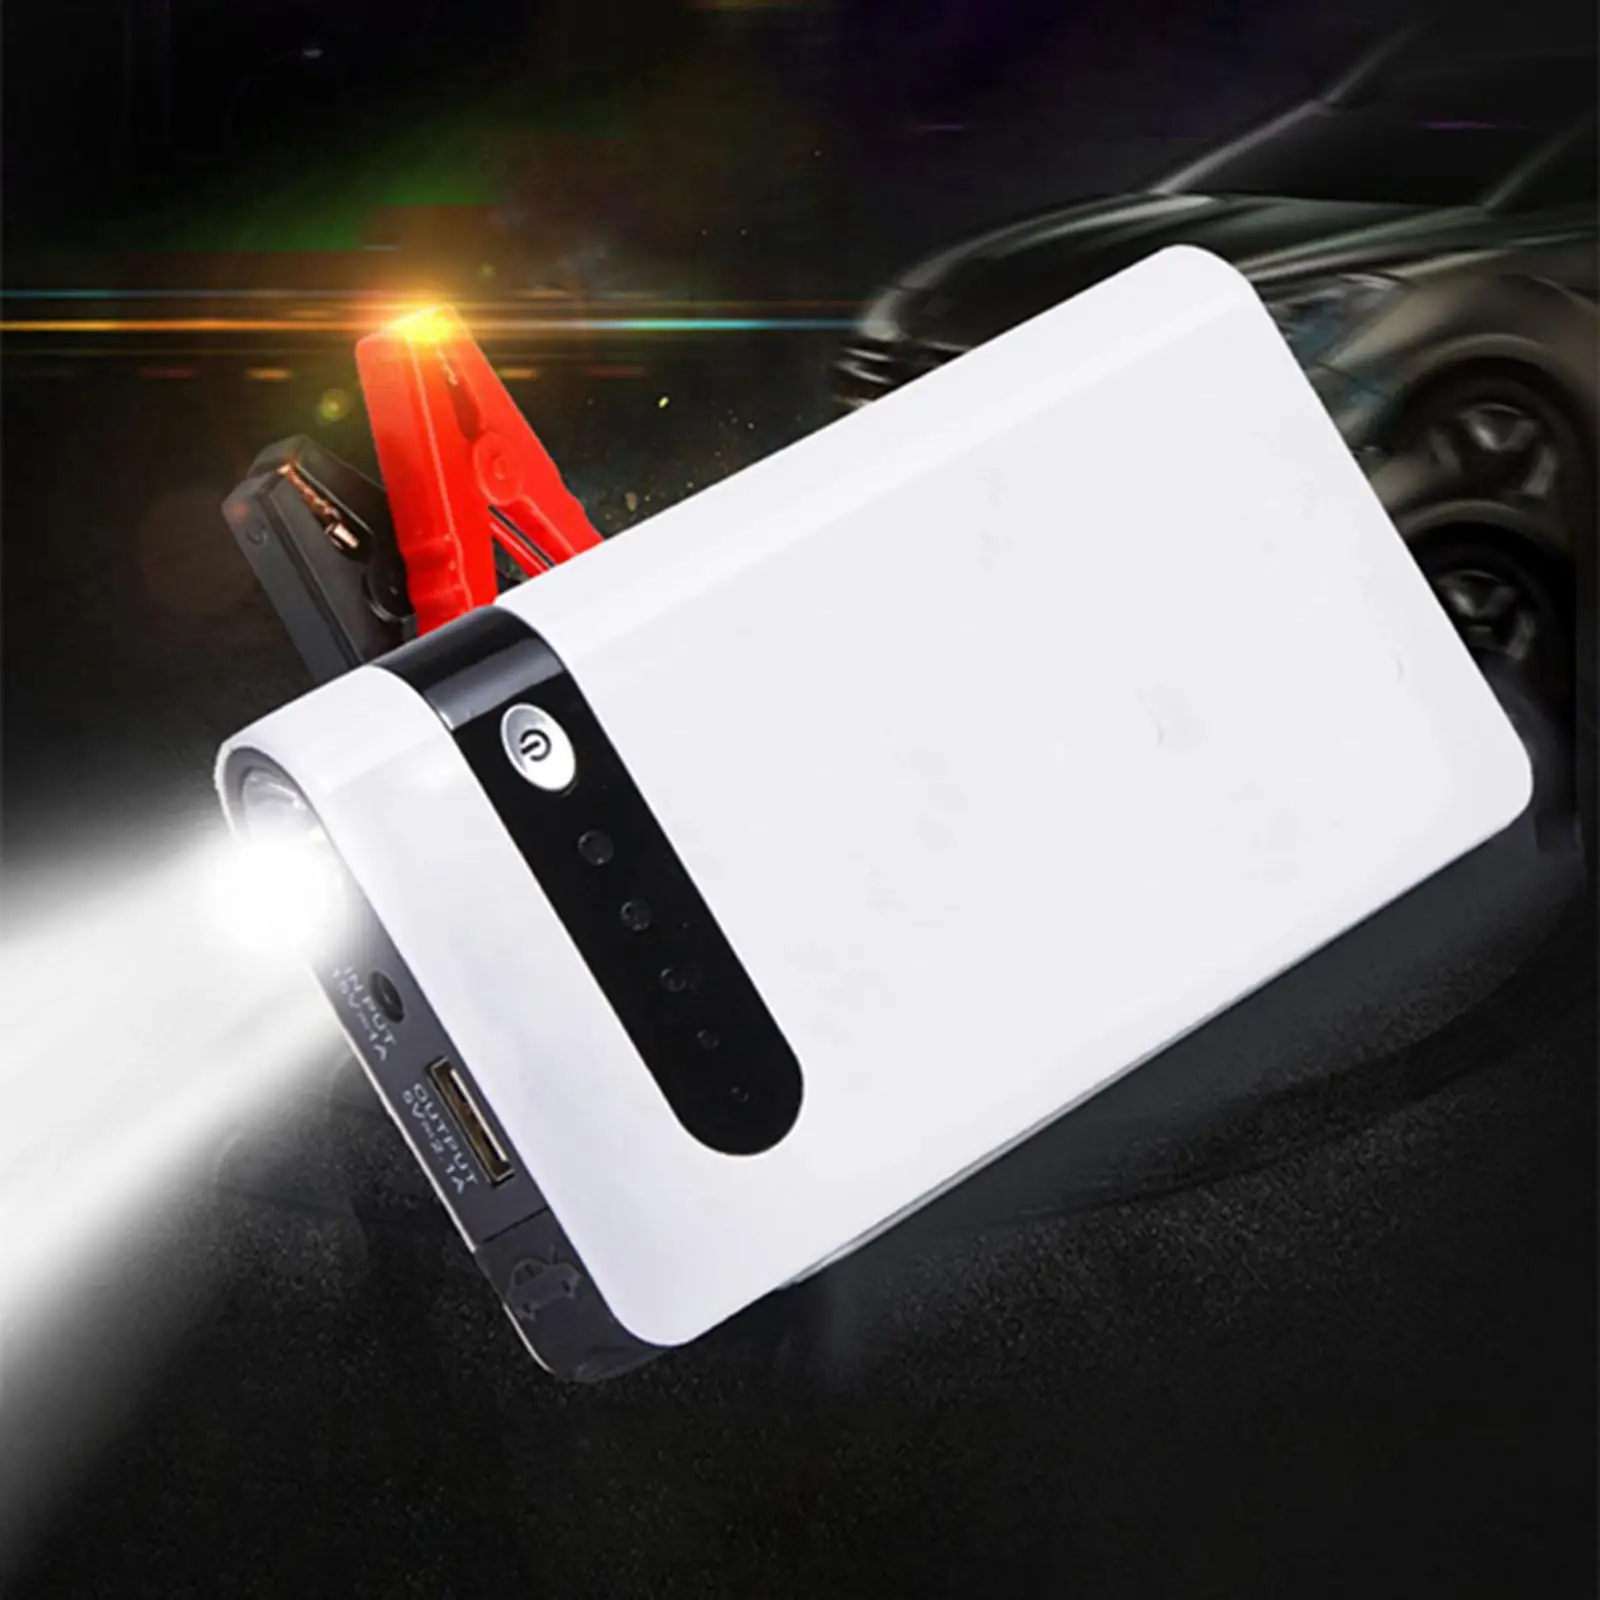 Car Jump Starter with LED Display 12V Auto Battery Booster Power Pack Emergency Start Power for MP4 Laptop Psp Mobile Phone